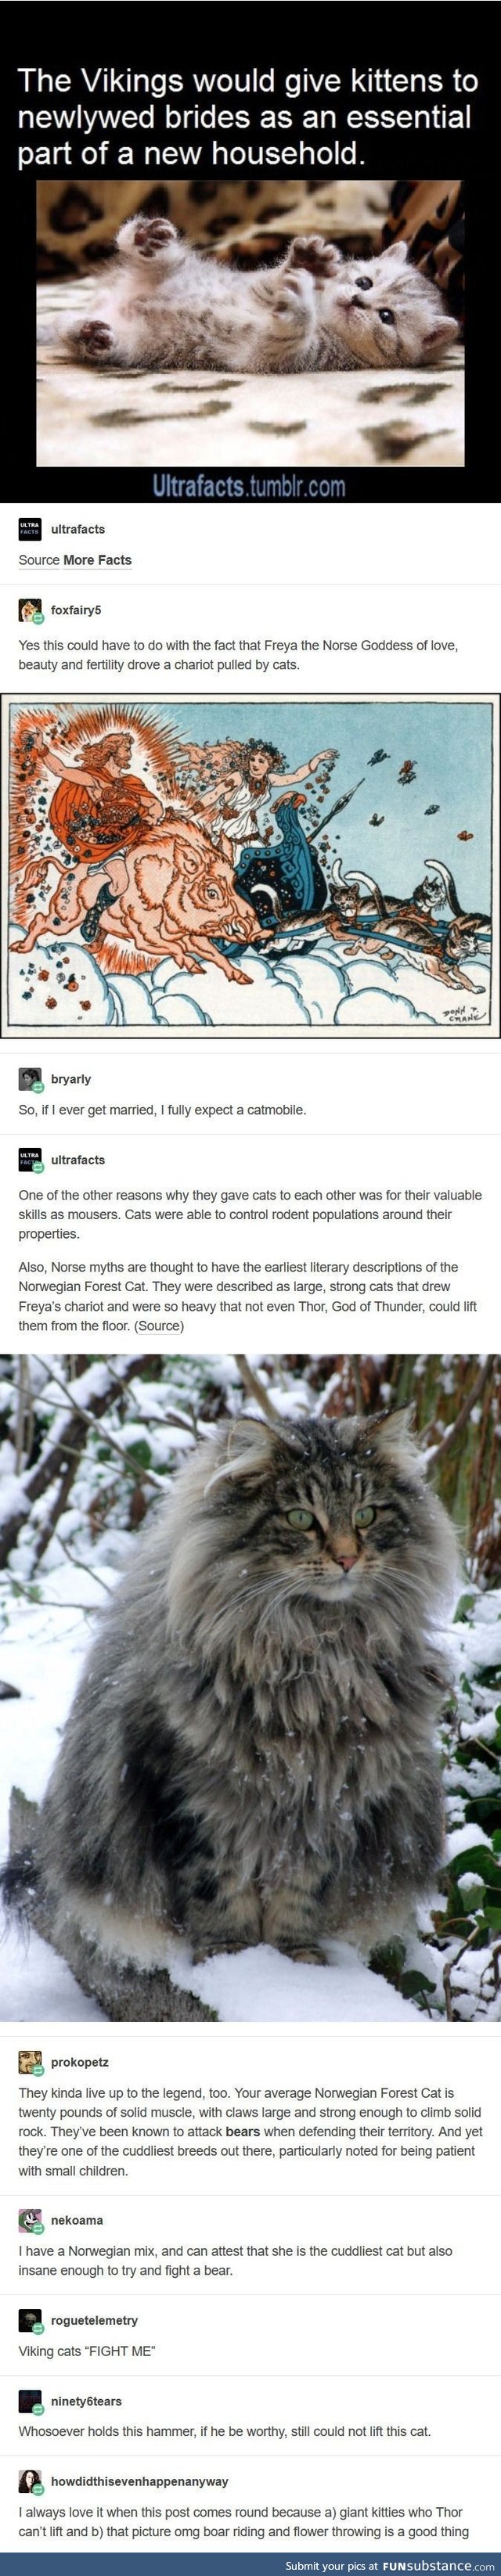 Cats are a Viking's best friend